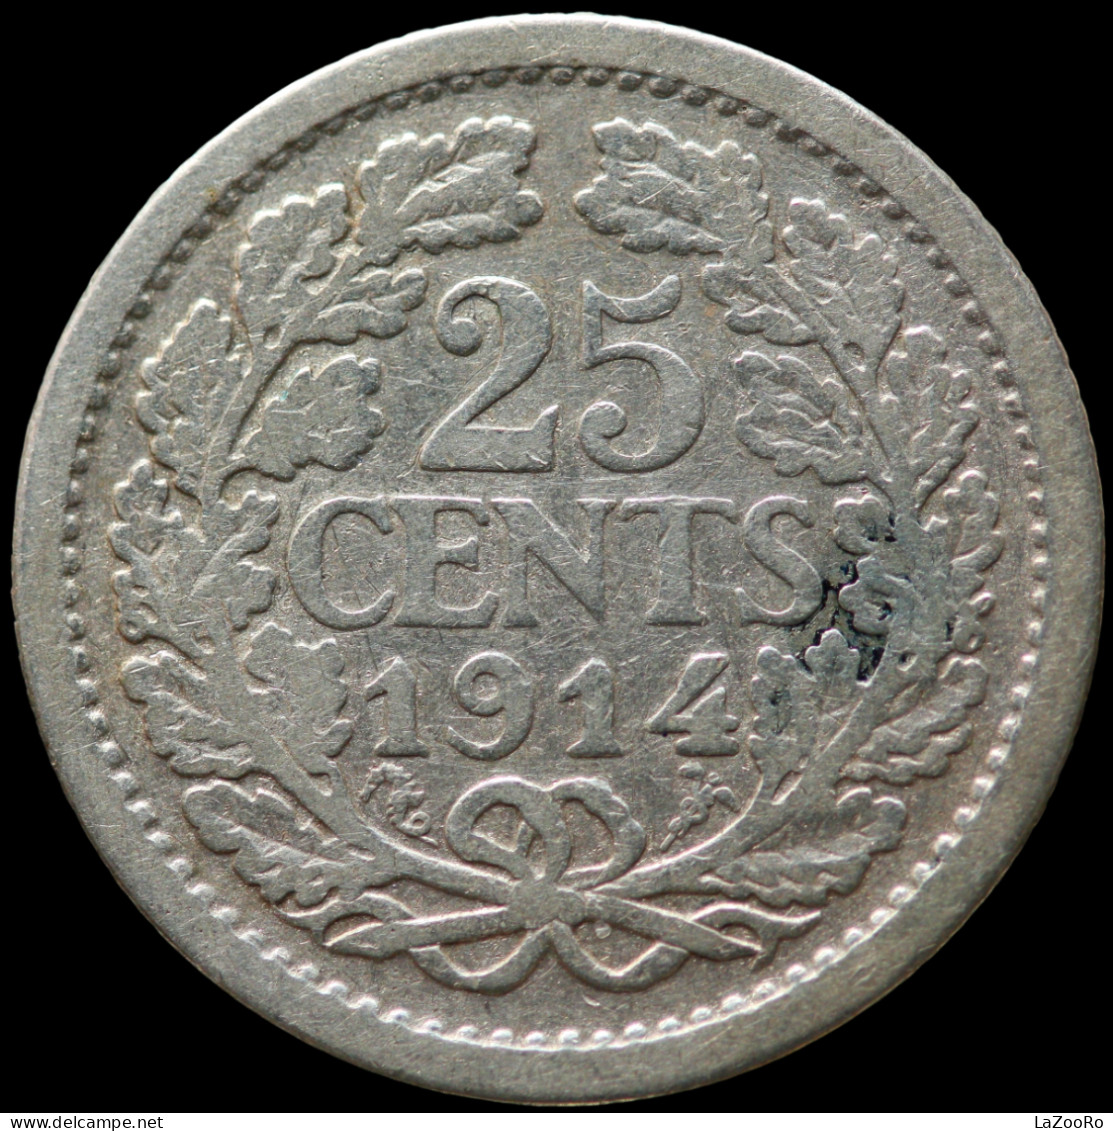 LaZooRo: Netherlands 25 Cents 1914 VF / XF - Silver - 25 Cent